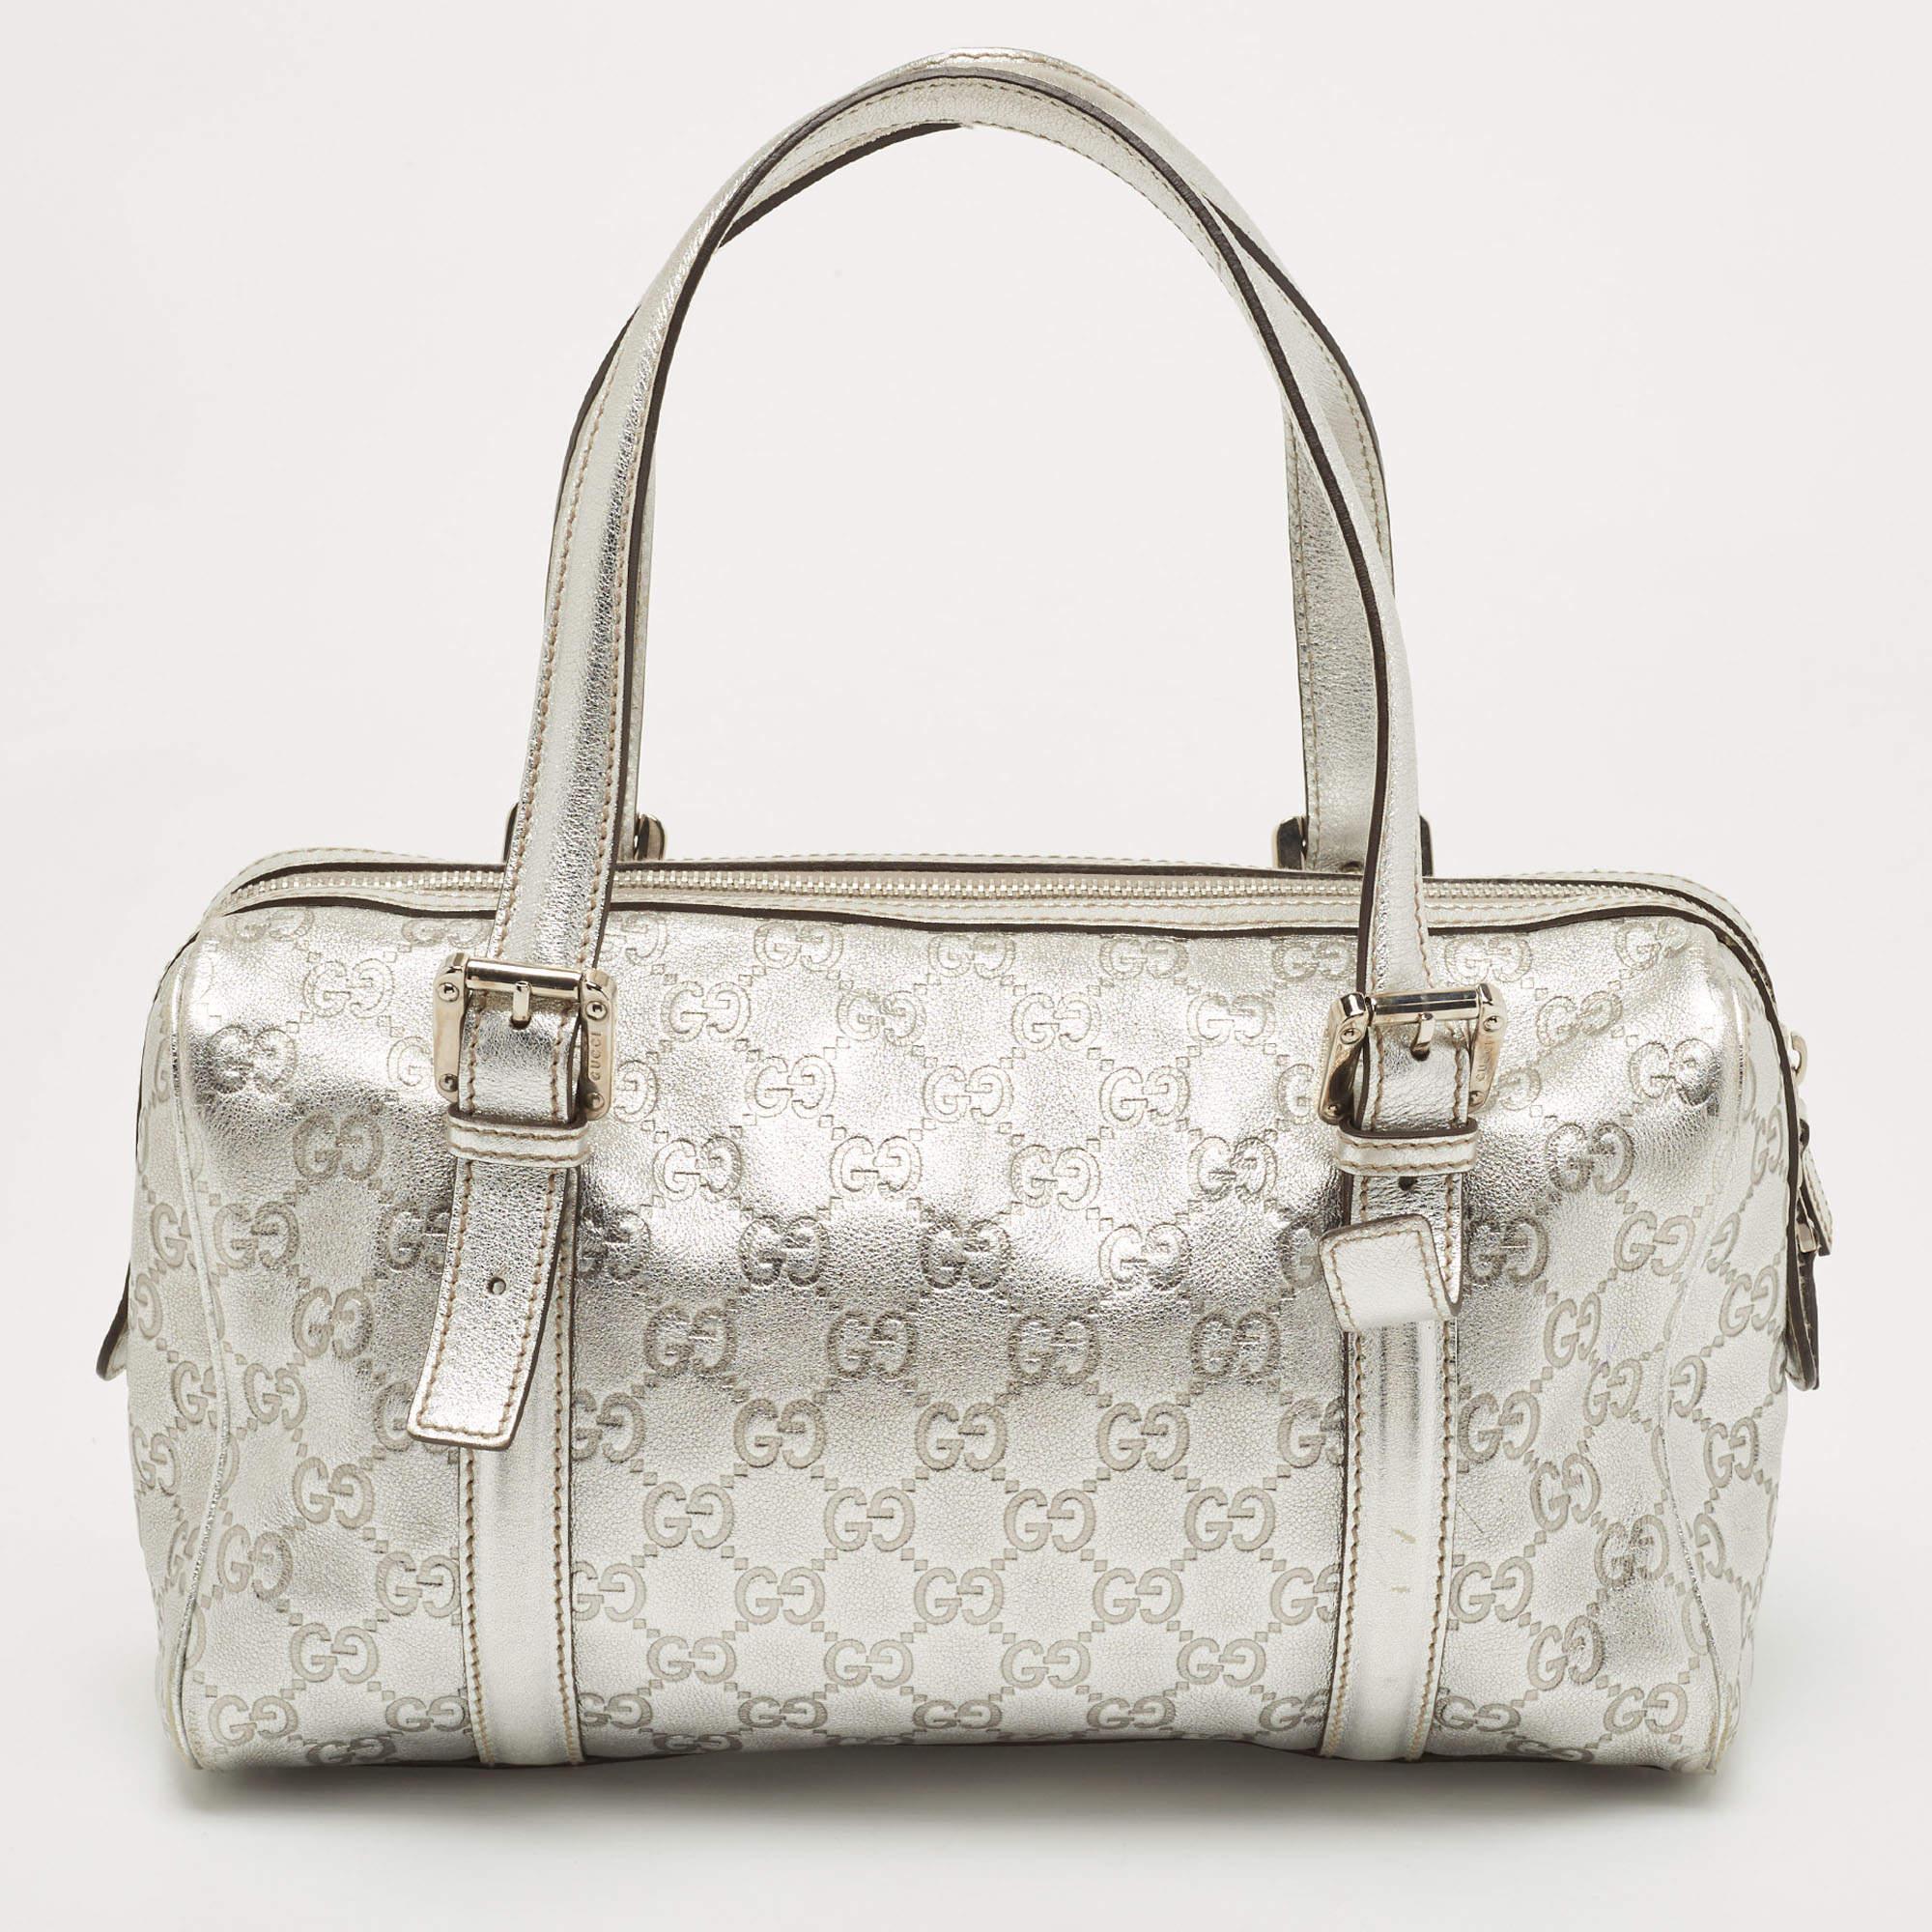 Spacious and captivating, this stunning Britt Boston bag is from the iconic house of Gucci. It has been crafted from silver Guccissima leather and features the GG interlocking logo on the front. It is equipped with a spacious fabric-lined interior,